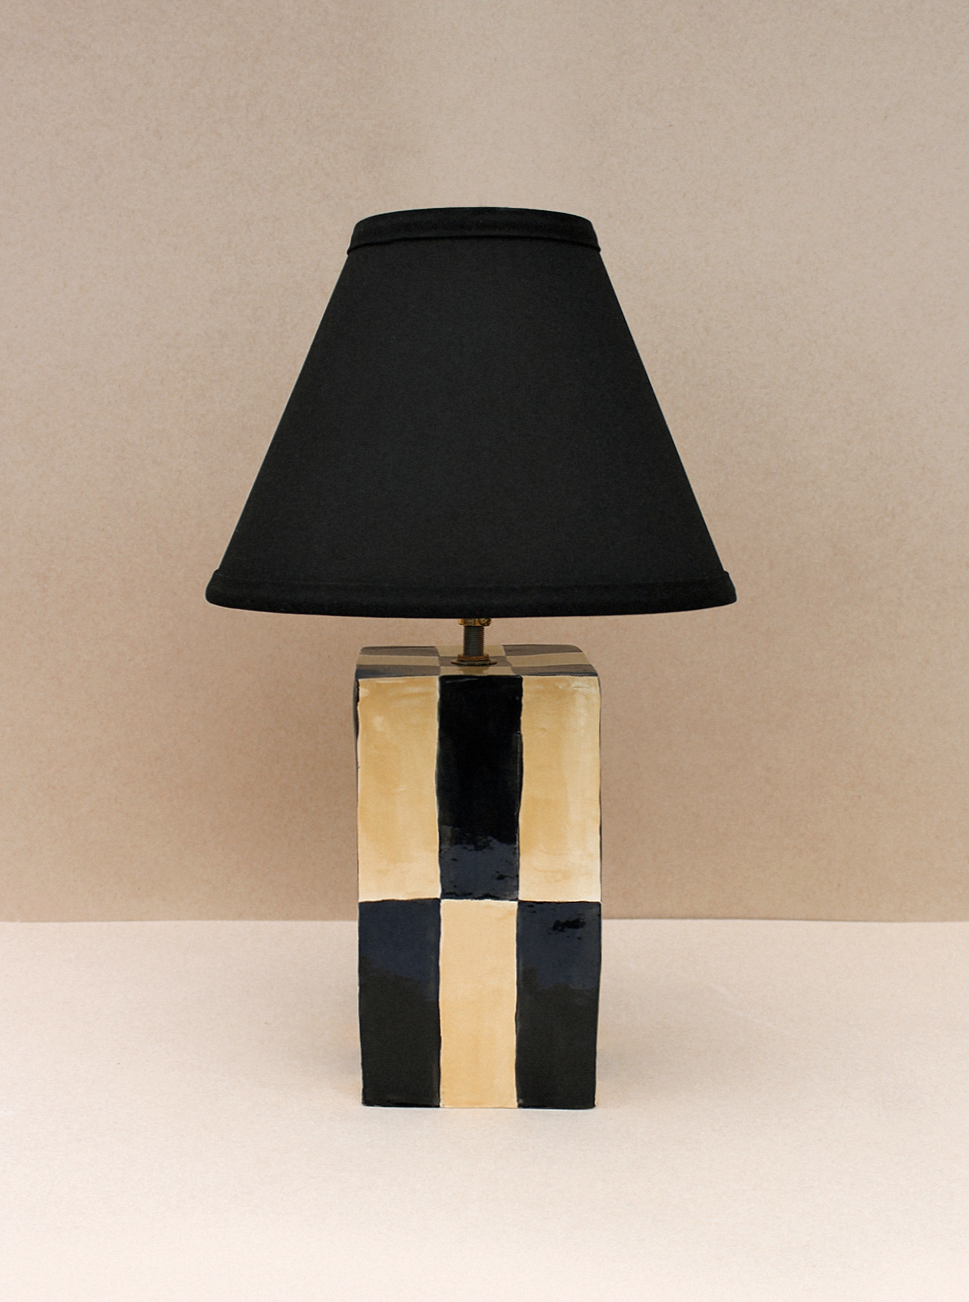 A contemporary Socorro Lamp by Casa Veronica with a geometric, gold and black striped base and a custom conical black lampshade, set against a neutral beige background.